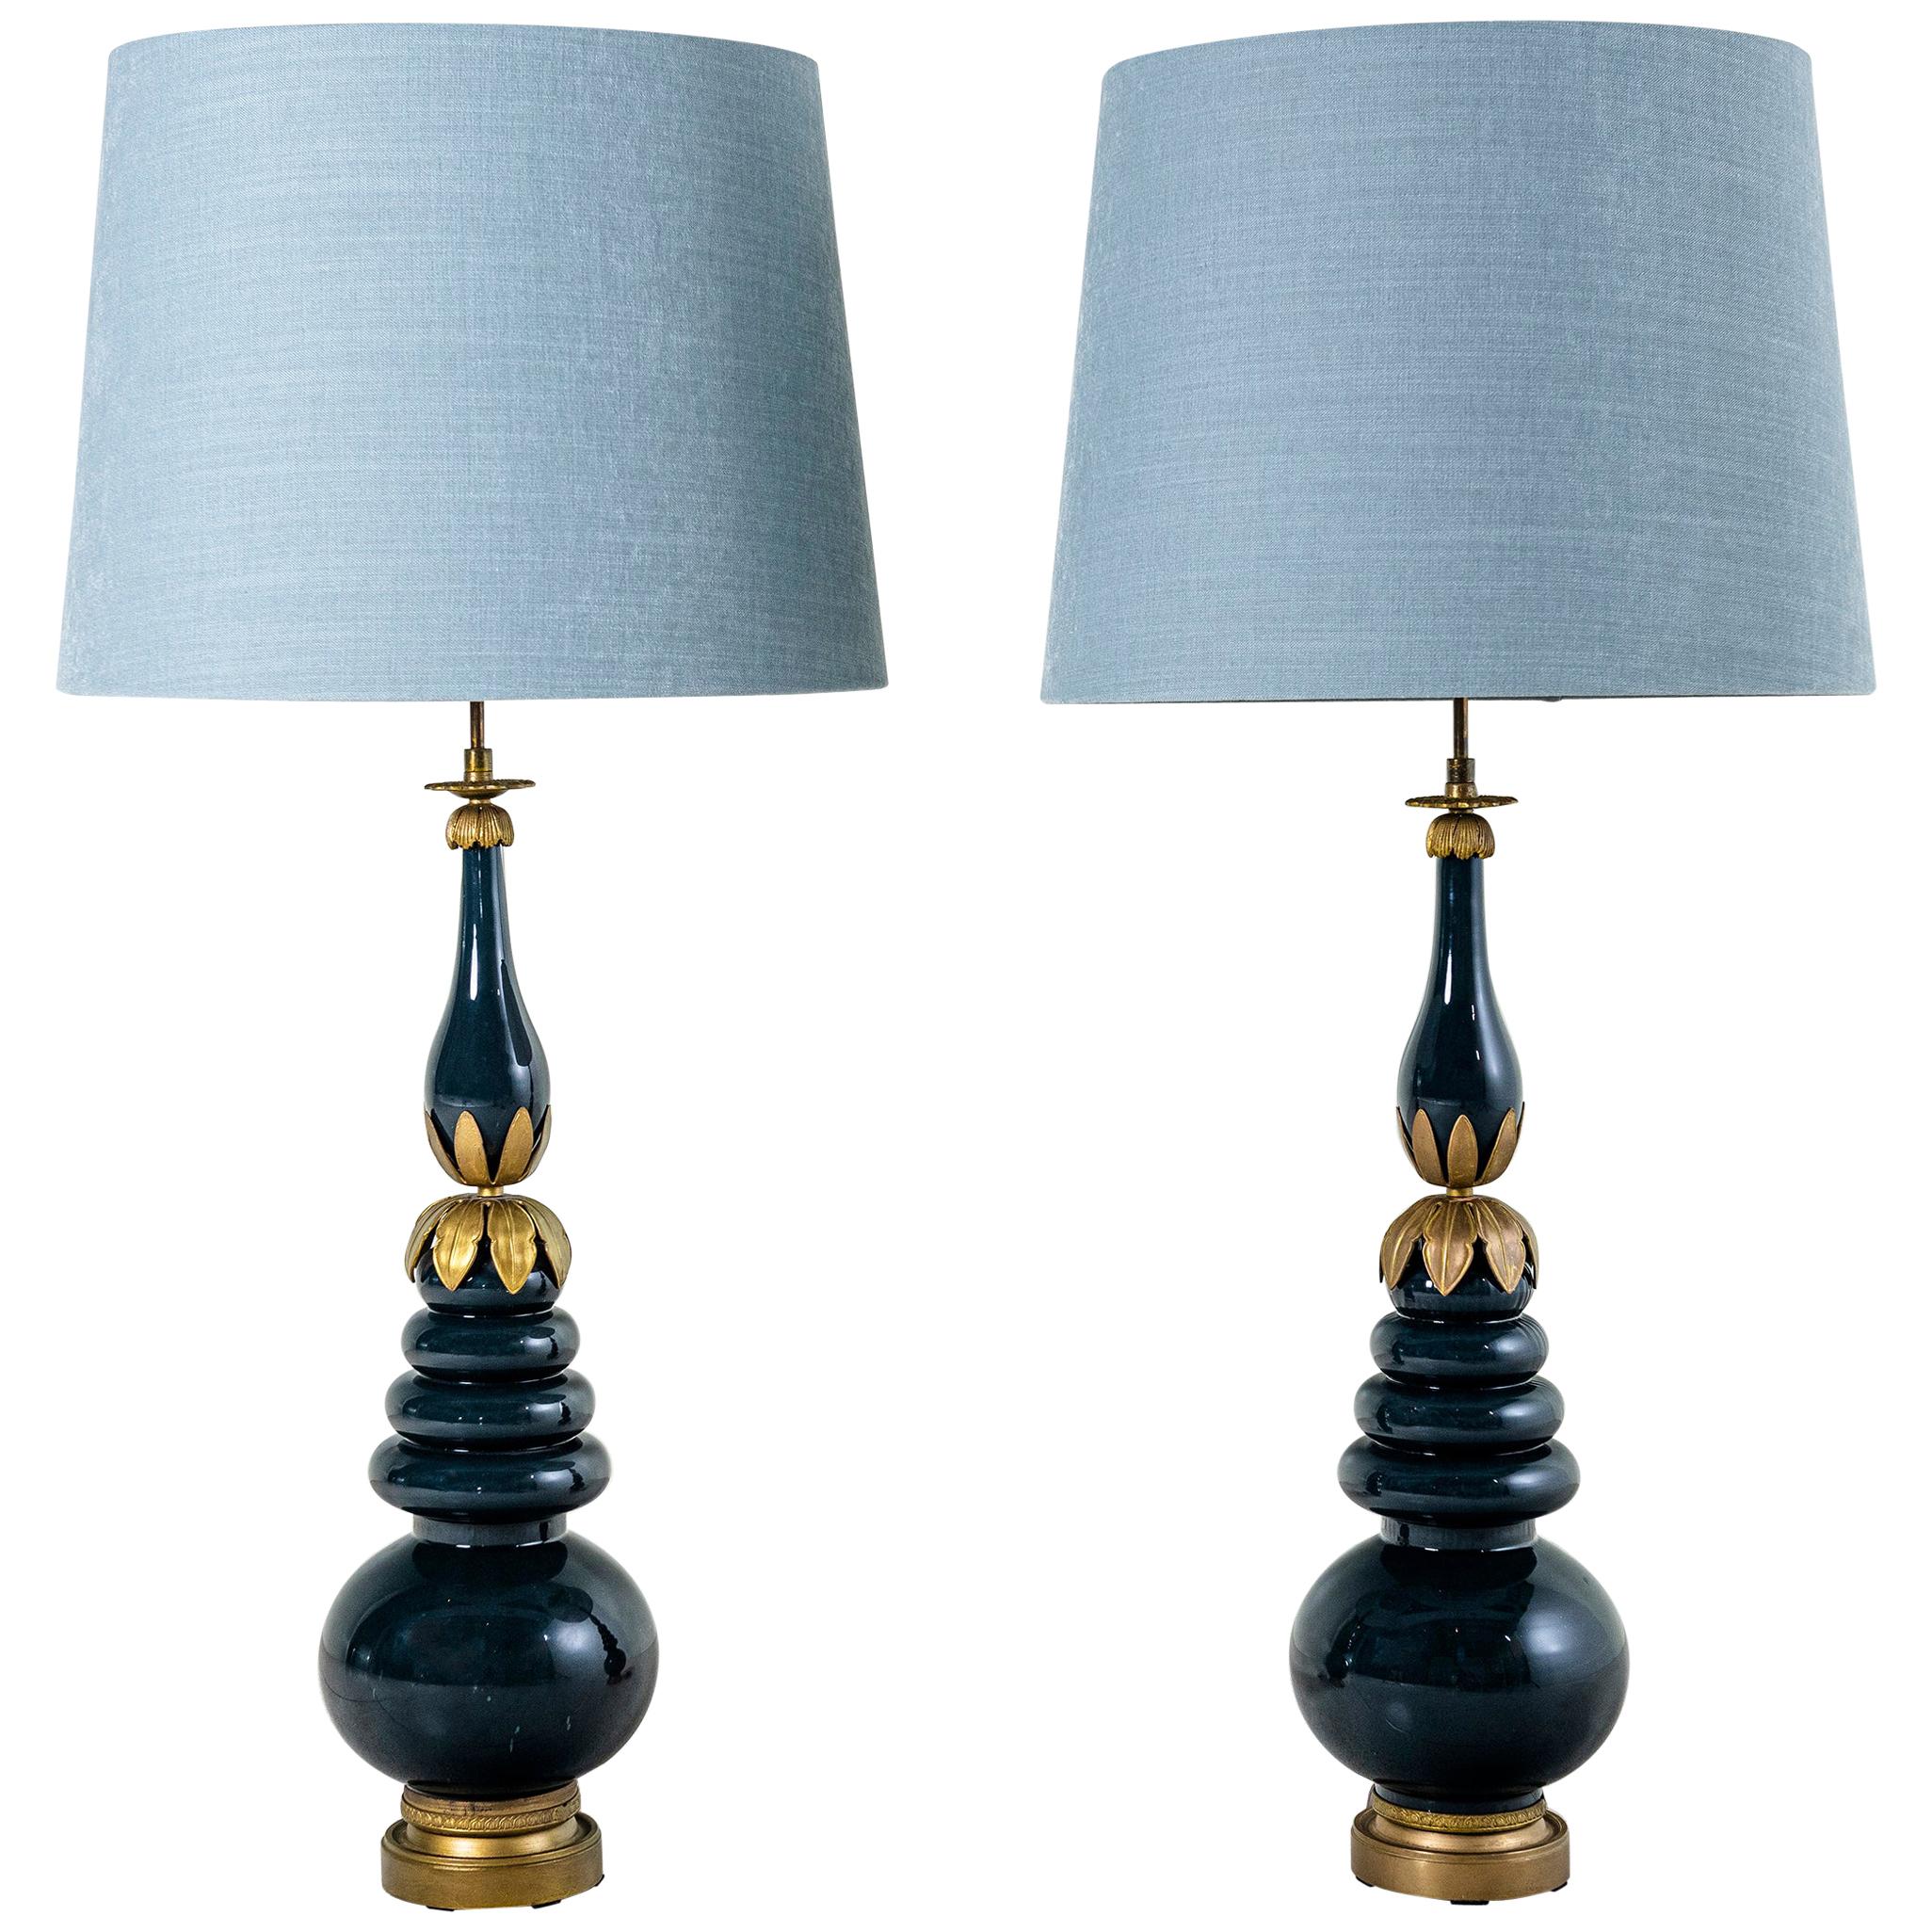 Pair of Bronze and Glass Table Lamps Attributed to Maison Jansen, France. For Sale